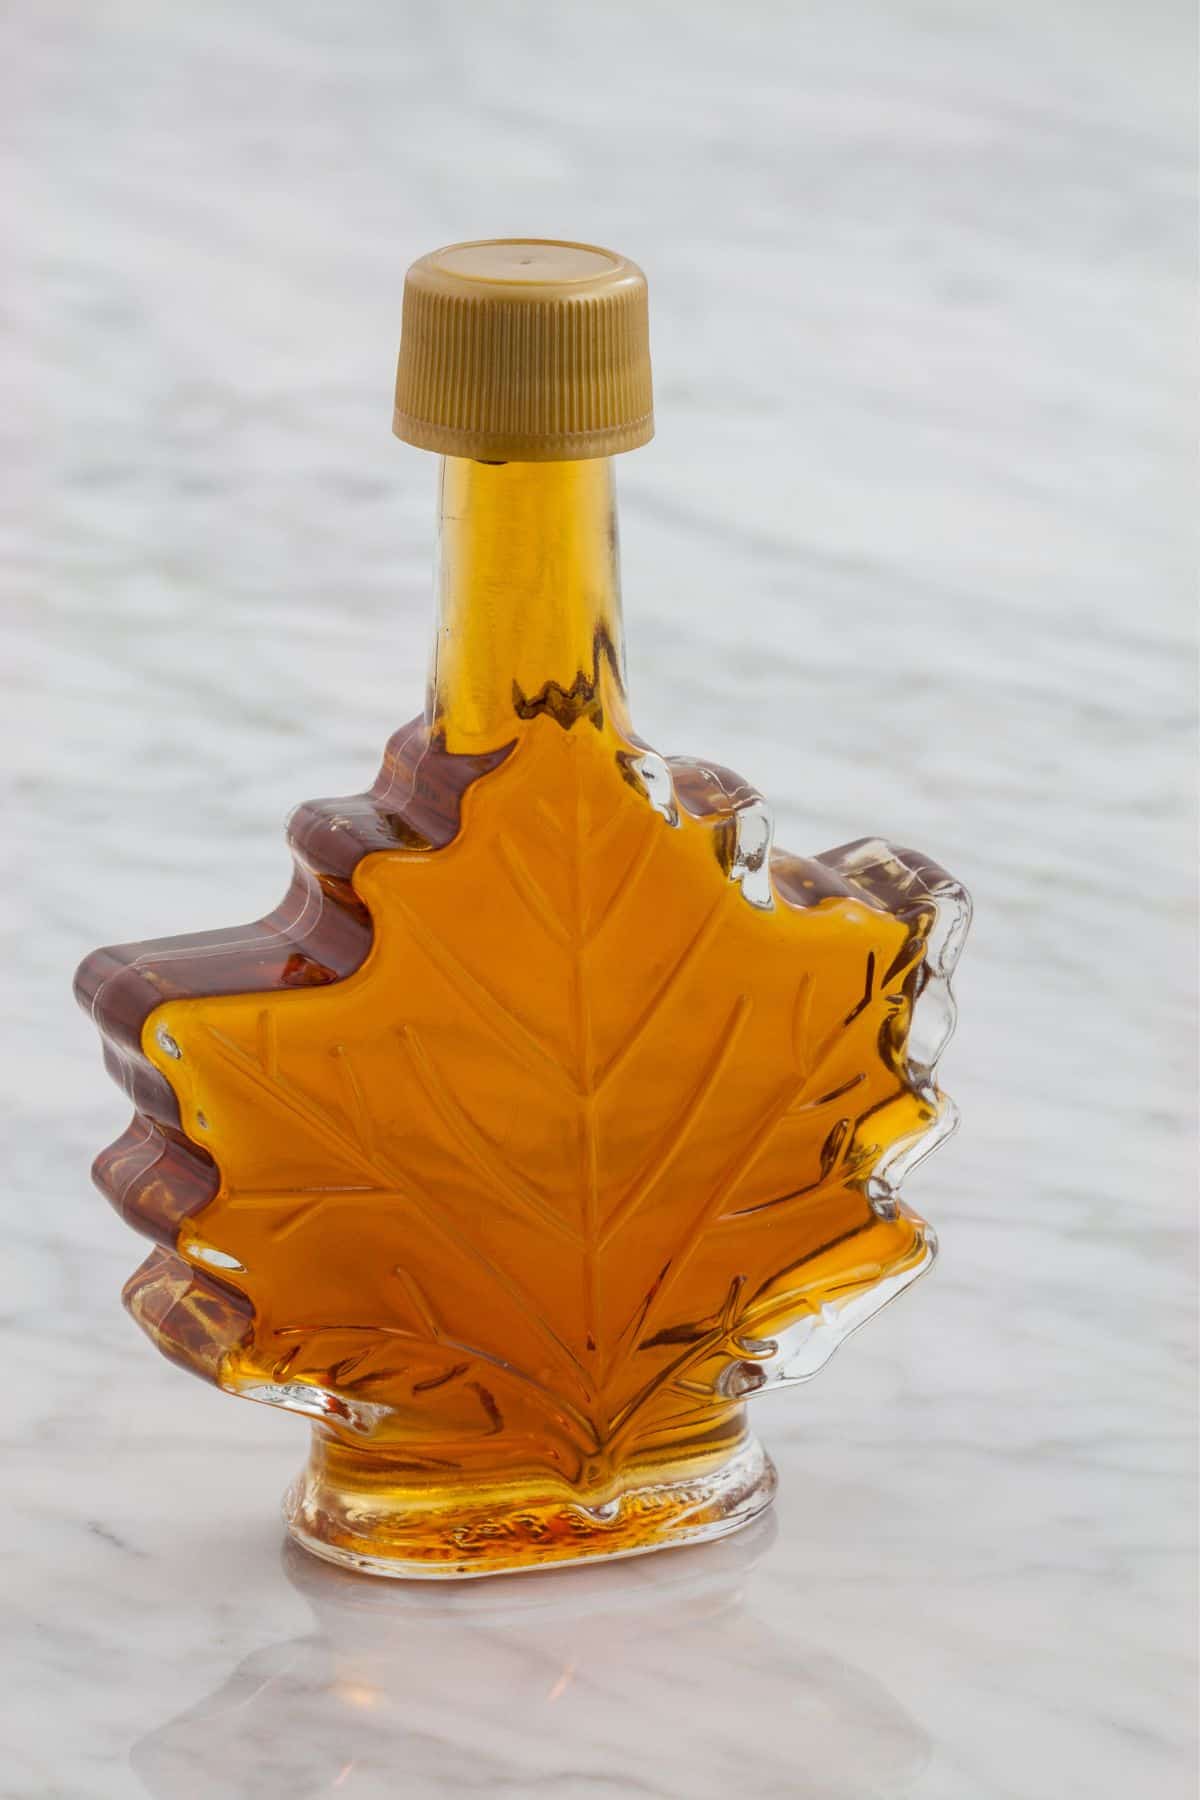 maple syrup in a leaf shape glass.